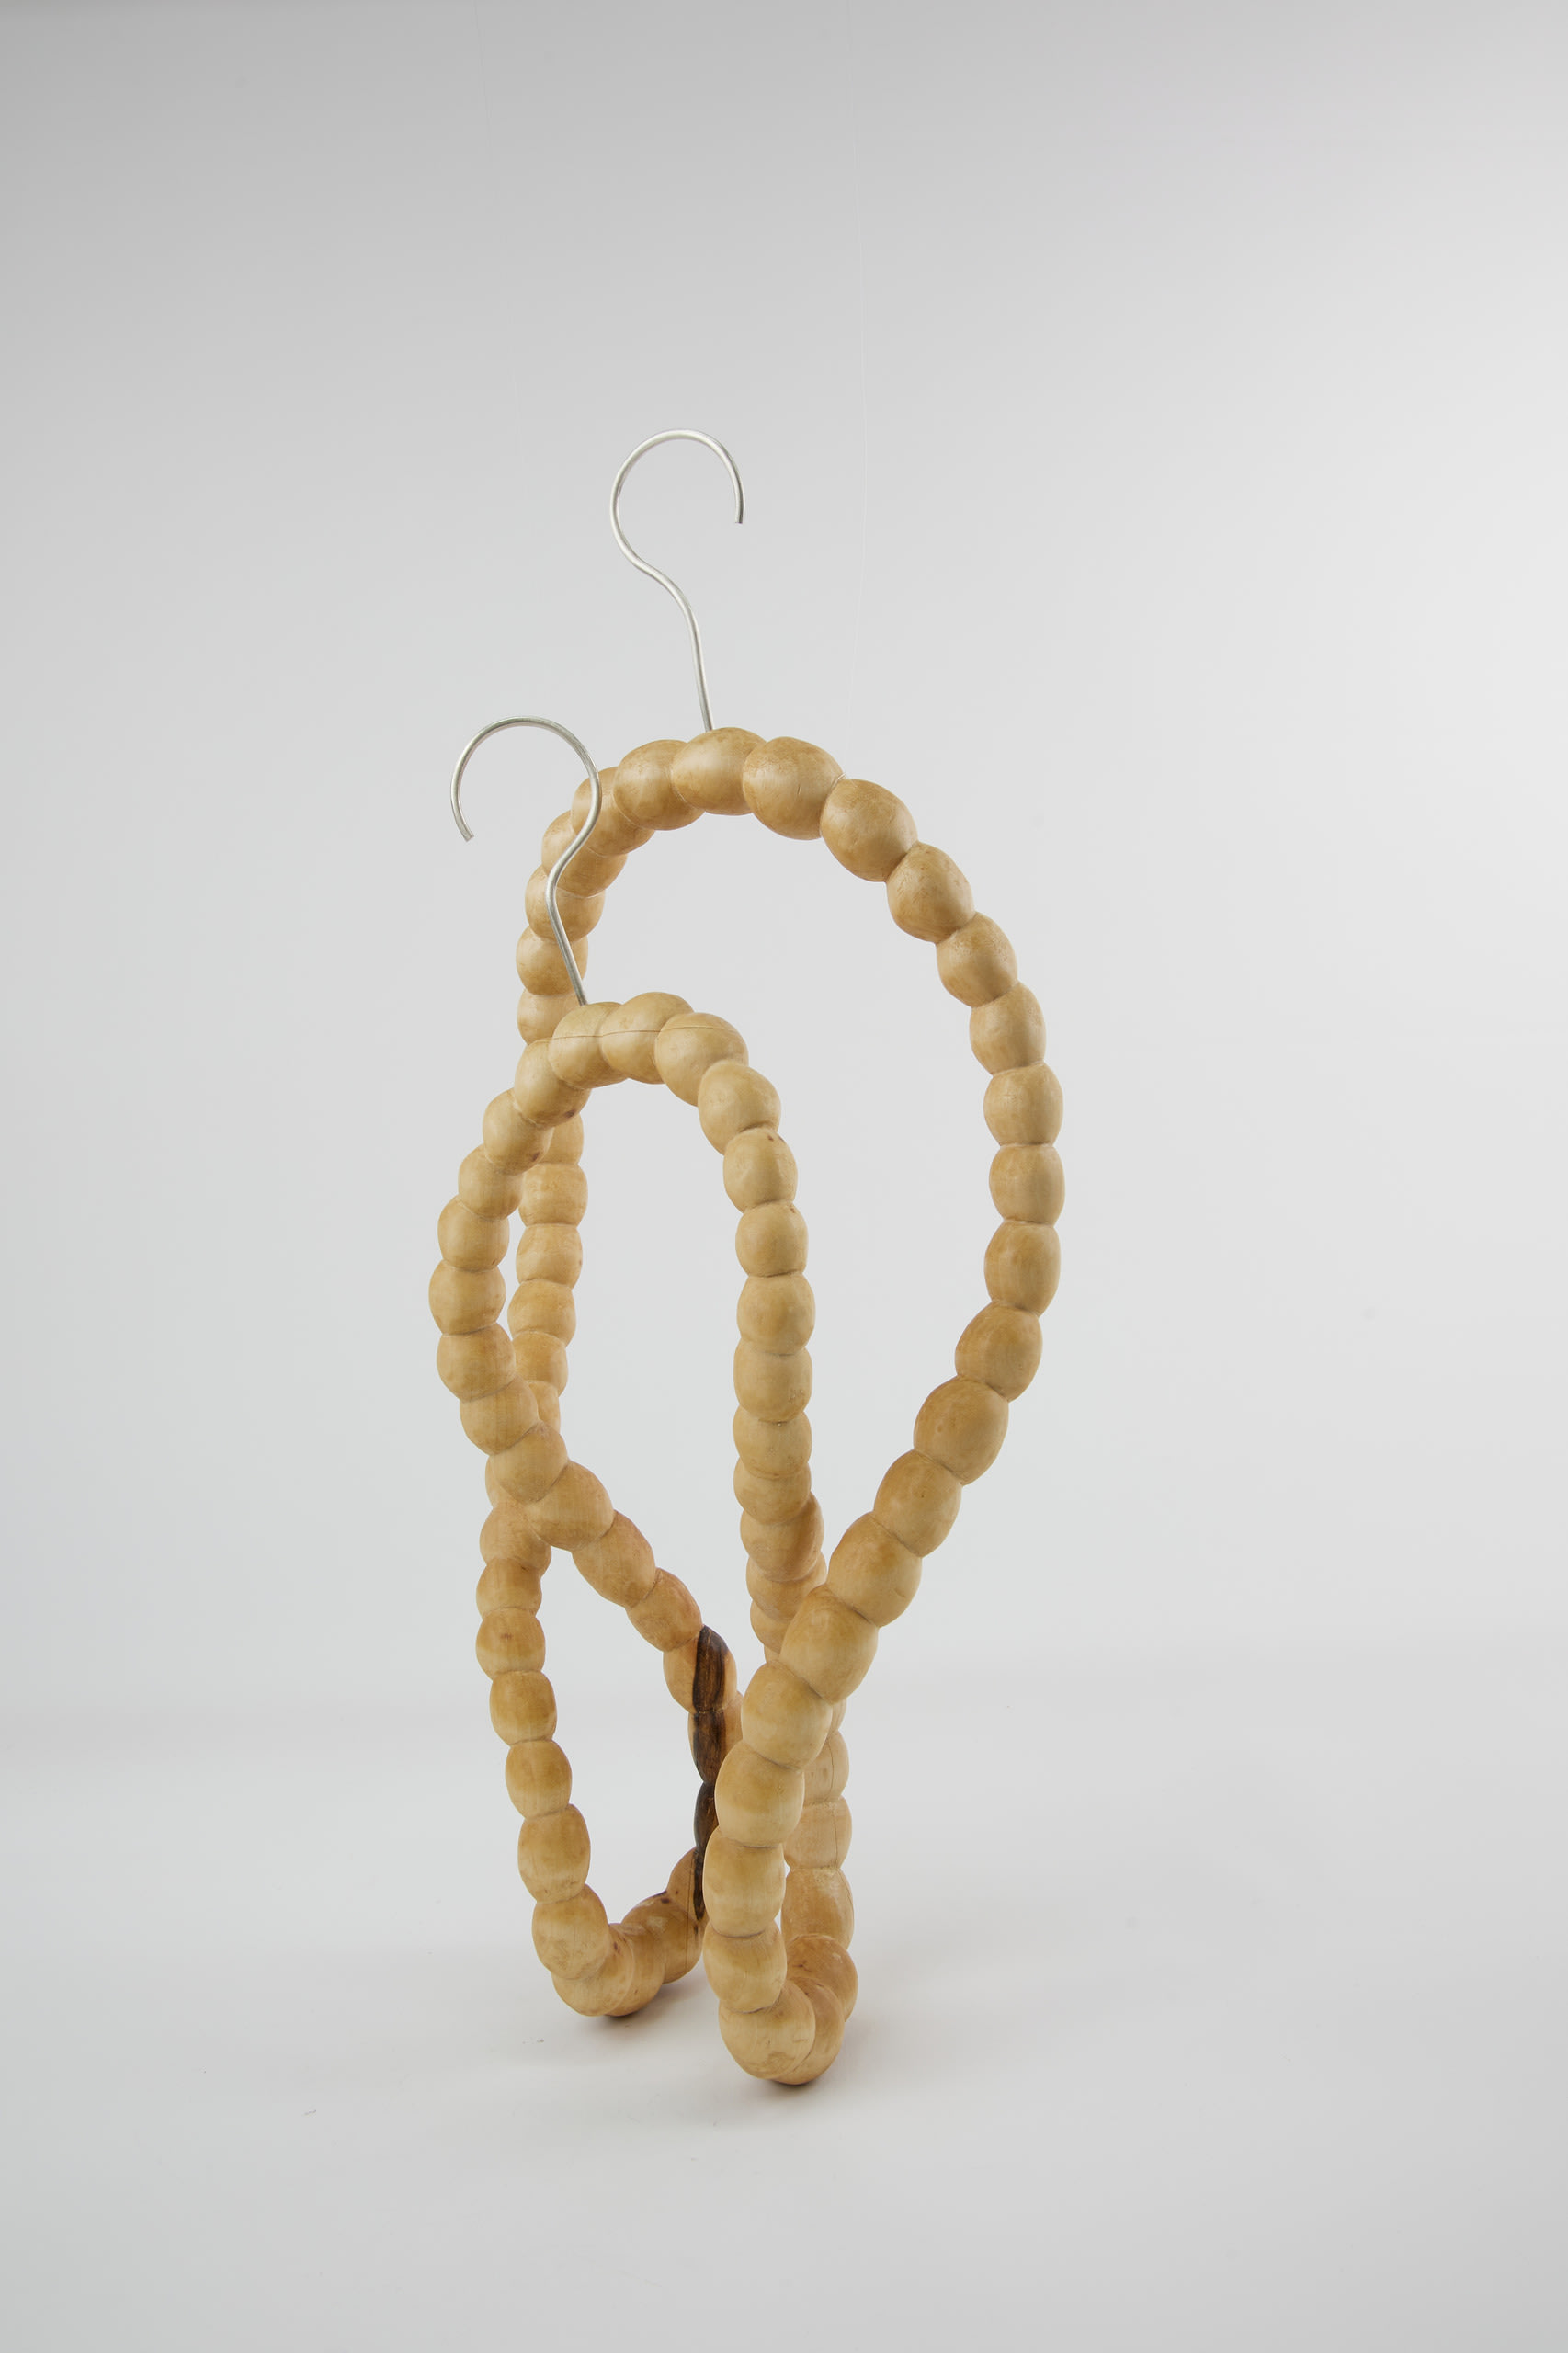 a long string of hand-carved wooden pearls from a whole block of wood with silver hooks on top